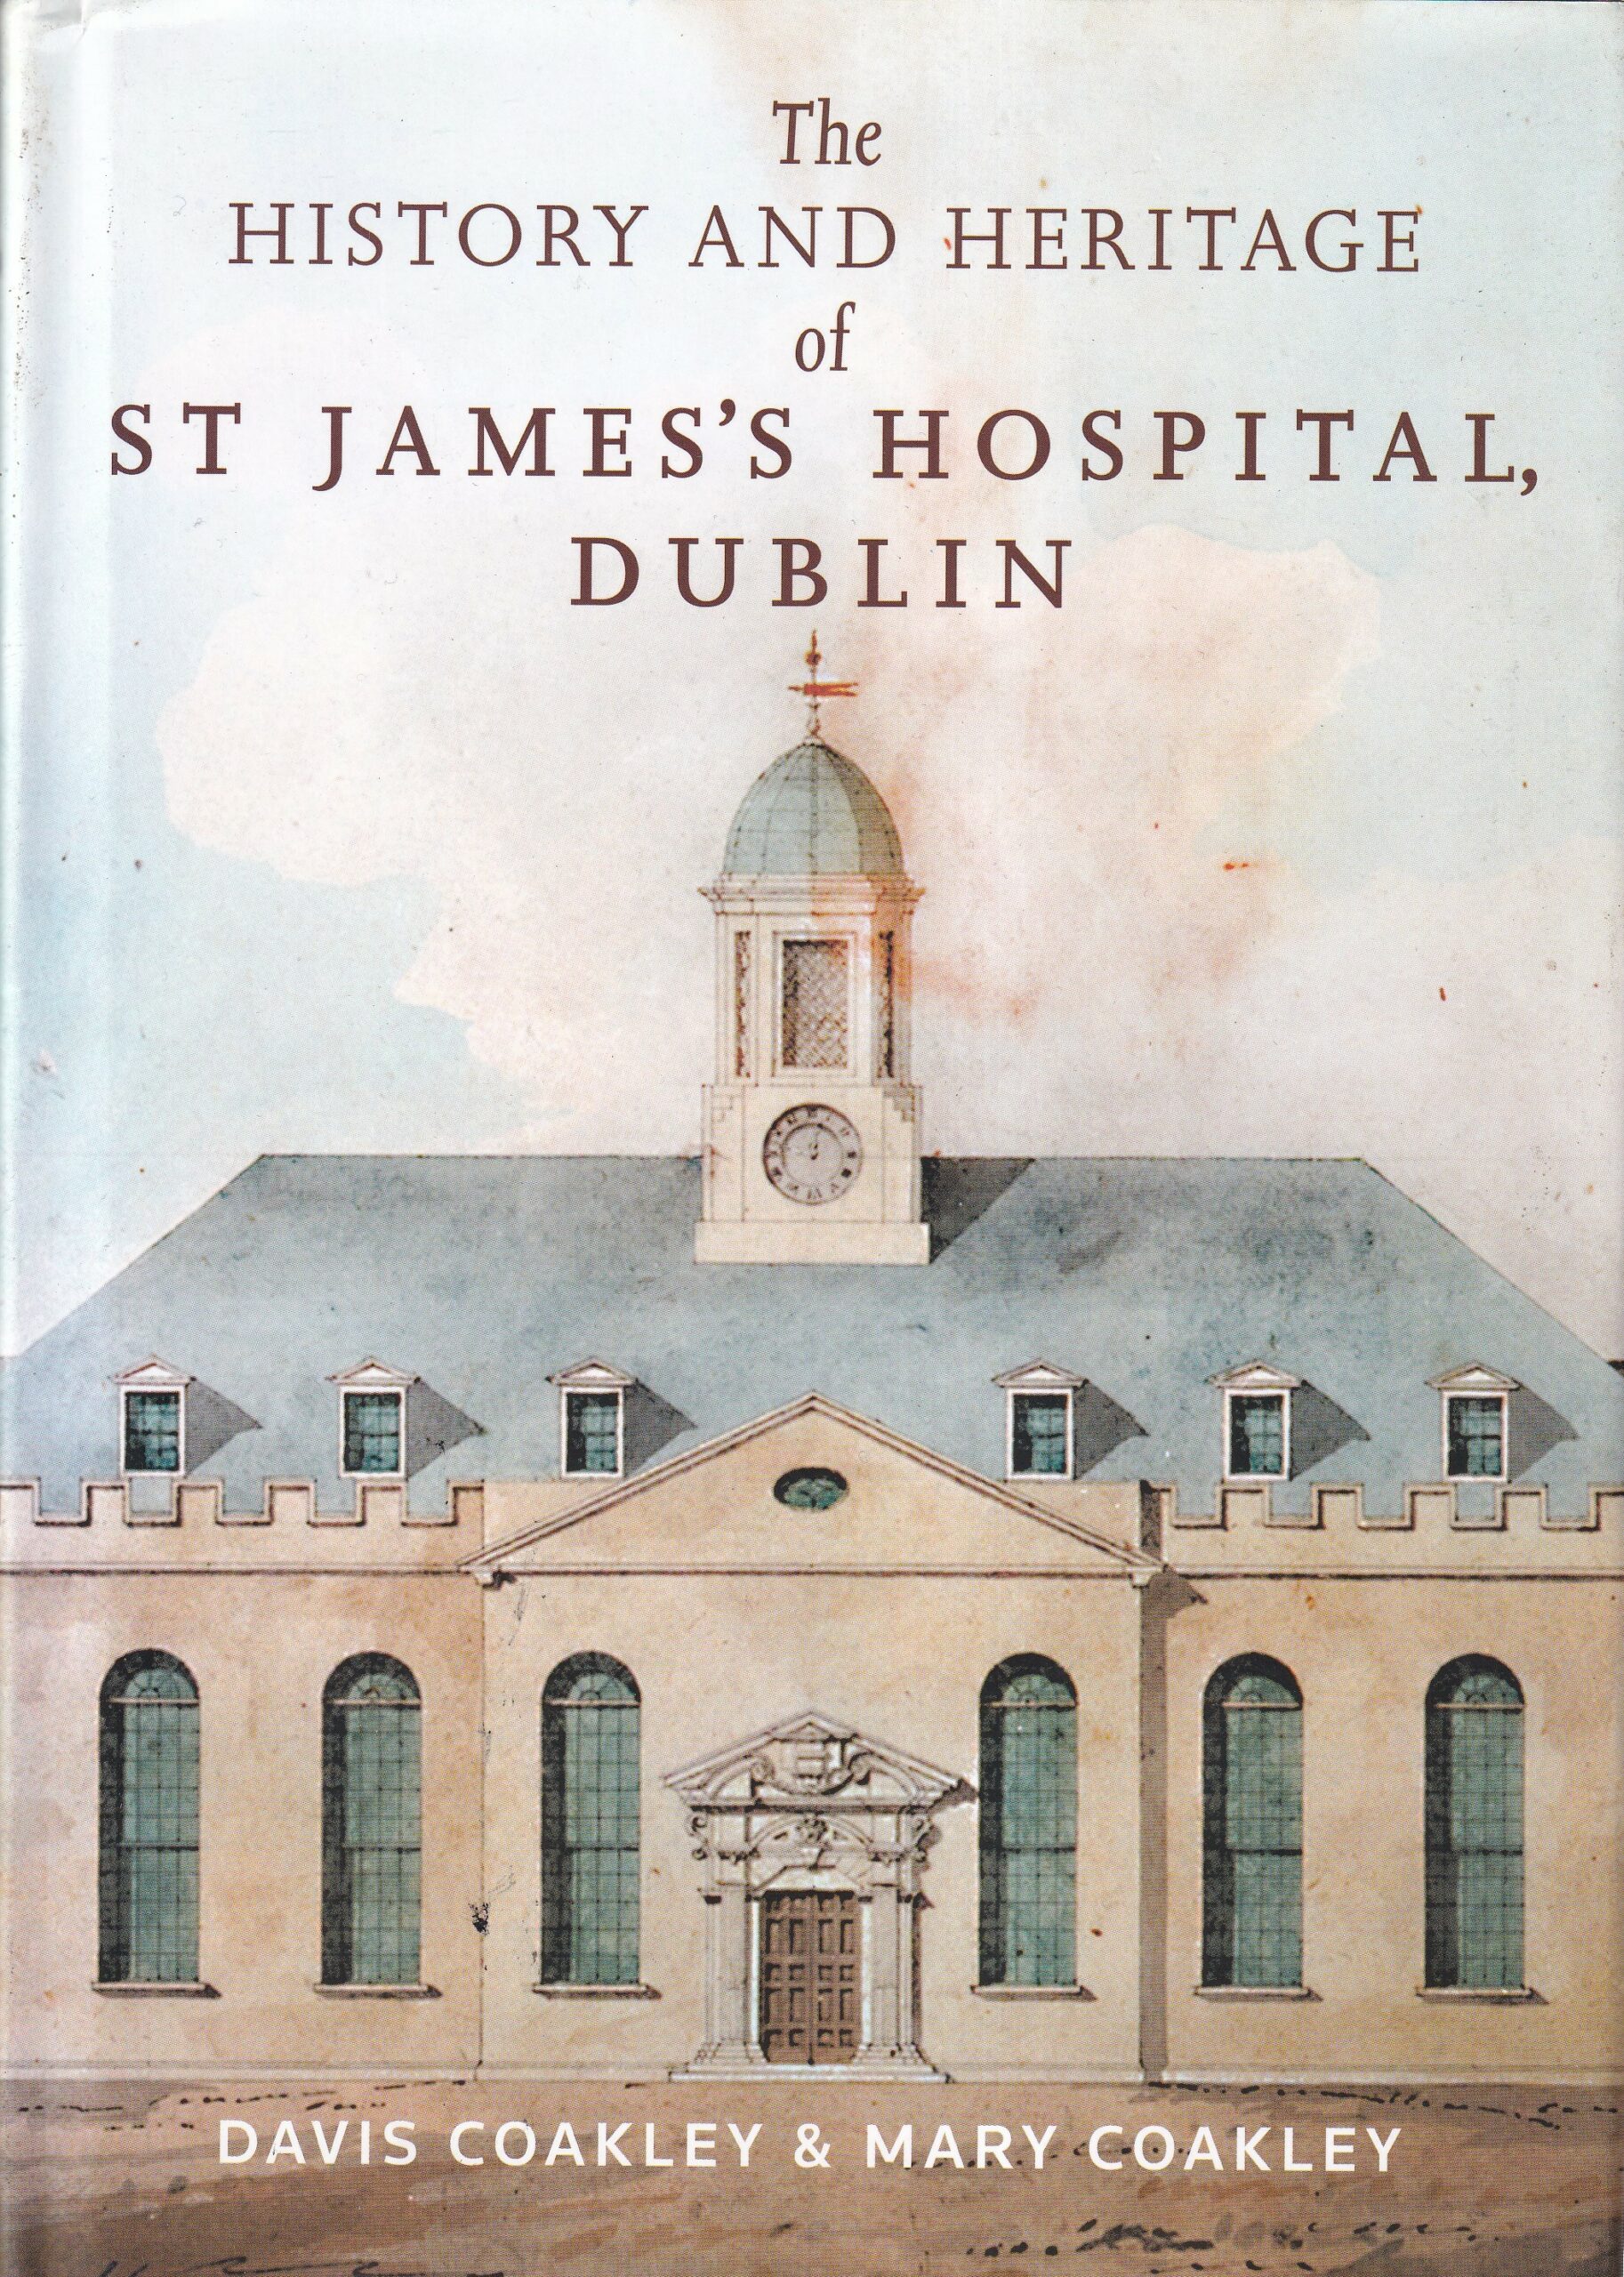 The History and Heritage of St. James’s Hospital Dublin | Davis Coakley and Mary Coakley | Charlie Byrne's